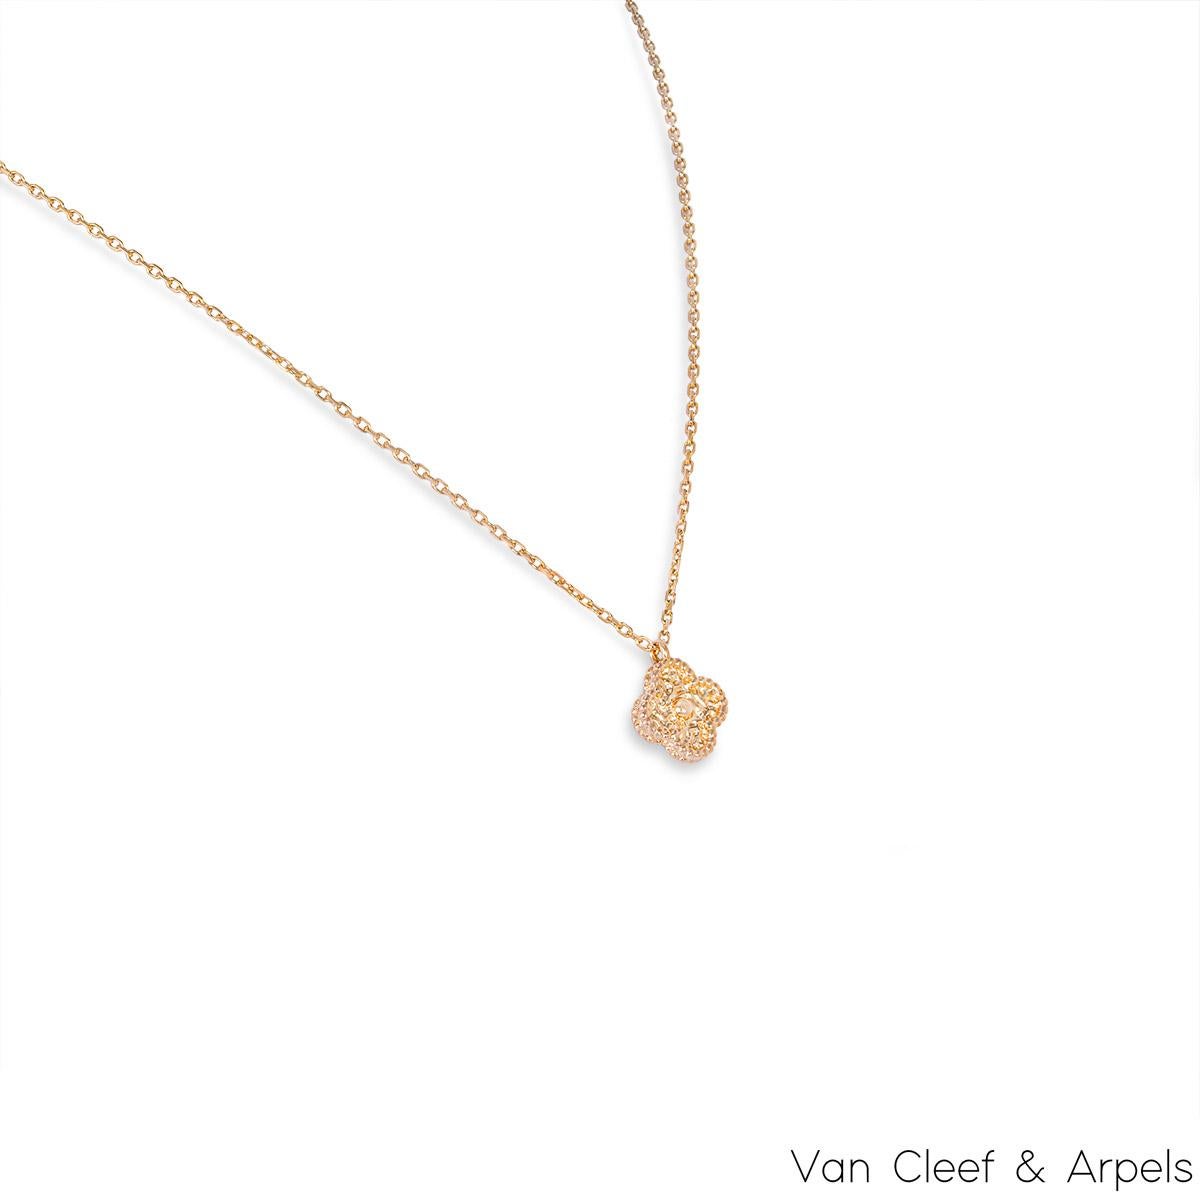 A timeless 18k rose gold pendant by Van Cleef & Arpels from the Sweet Alhambra collection. The pendant features a 4 leaf clover motif set with a textured pattern and complemented by a beaded outer edge. The motif measures 0.9cm in width and suspends